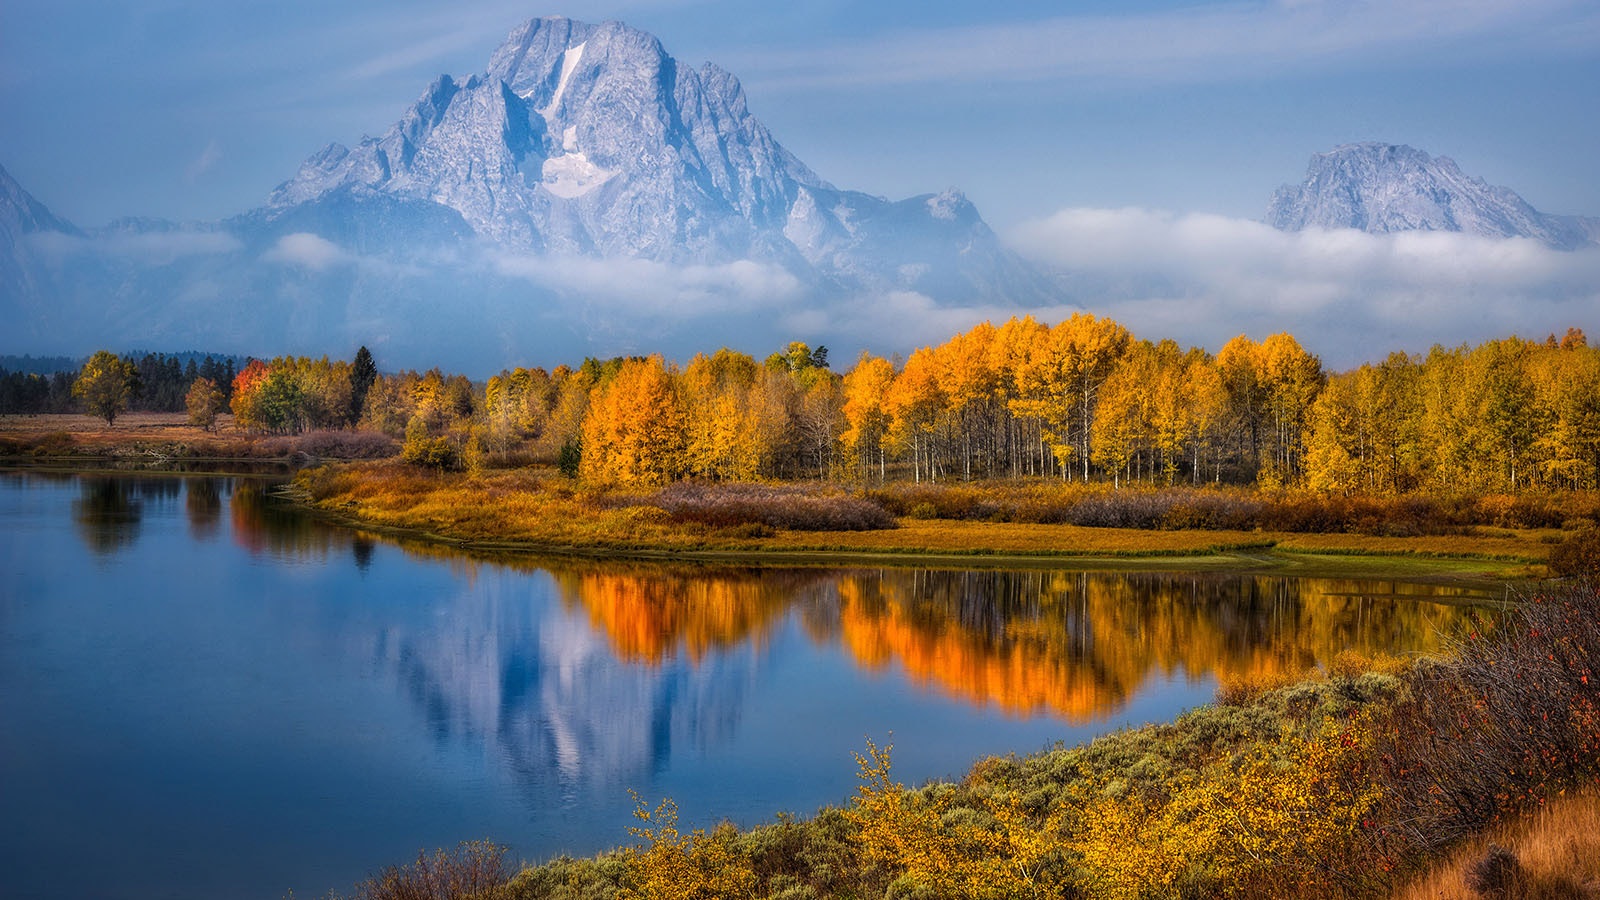 Fall colors and Mount Moran are reflected at Oxbow Bend in autumn at Grand Teton National Park in Wyoming.